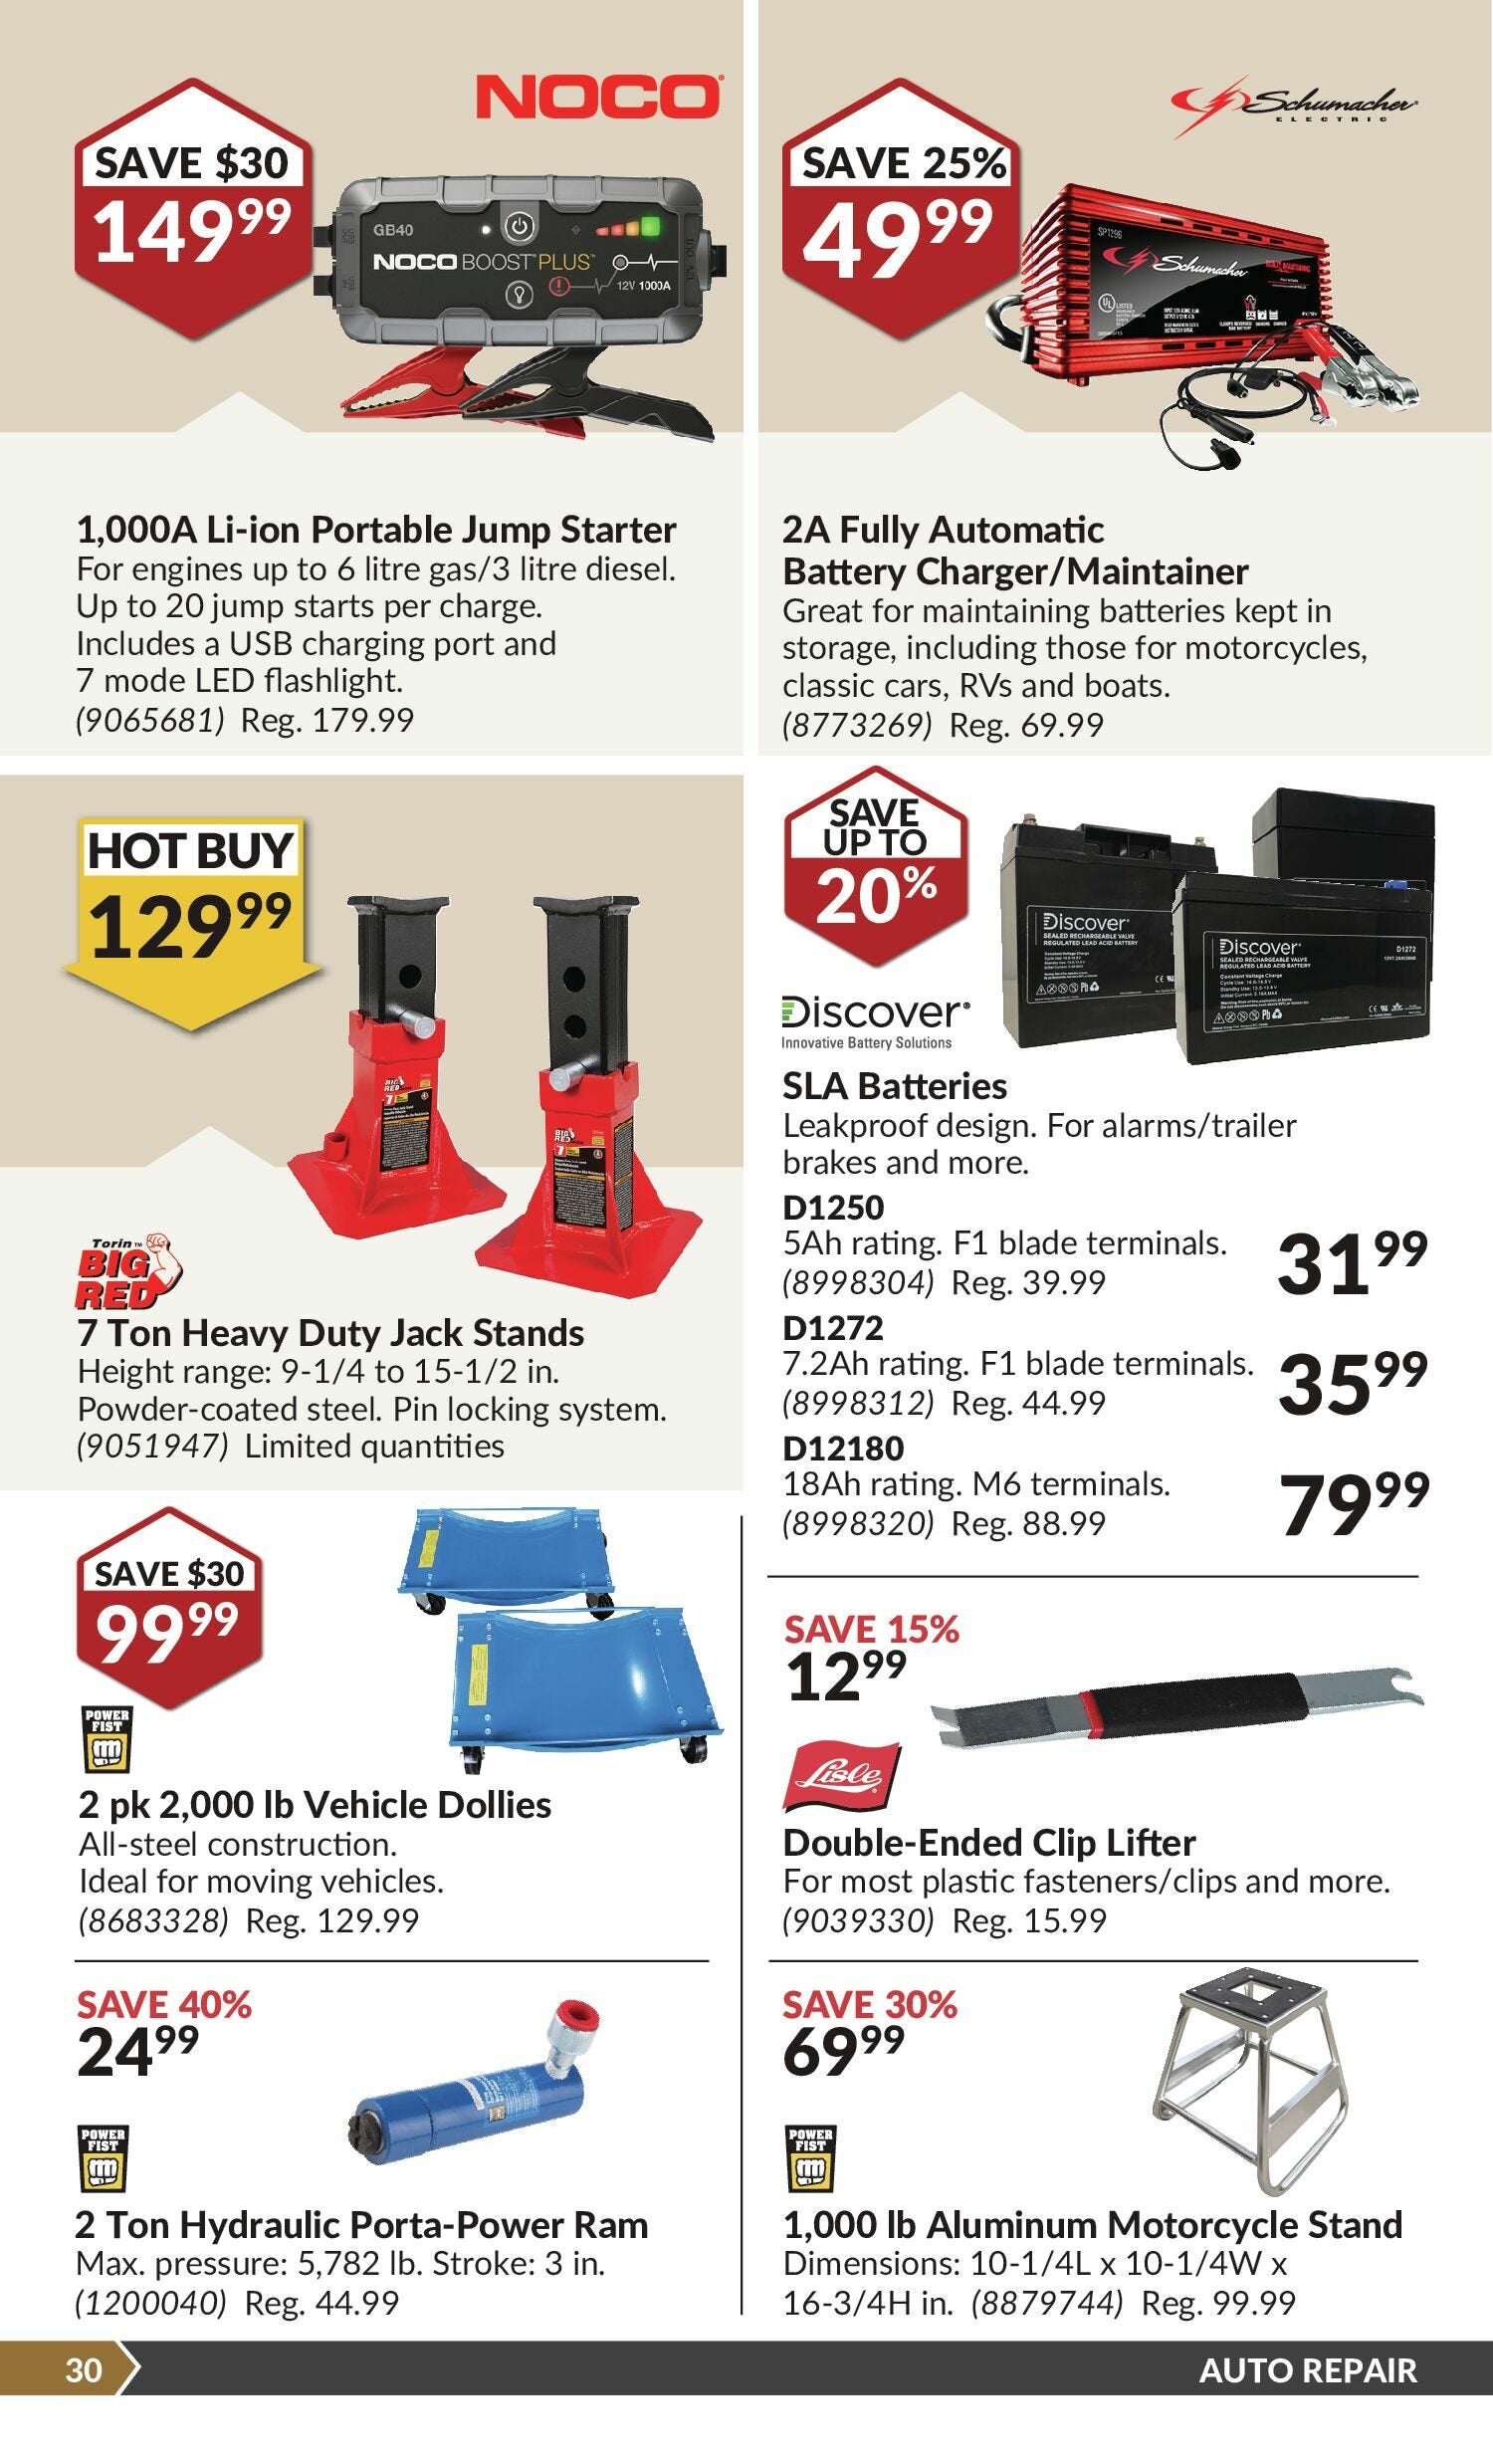 Princess Auto Weekly Flyer - 2 Week Sale - The Place To Find It All - Aug 1  – 13 